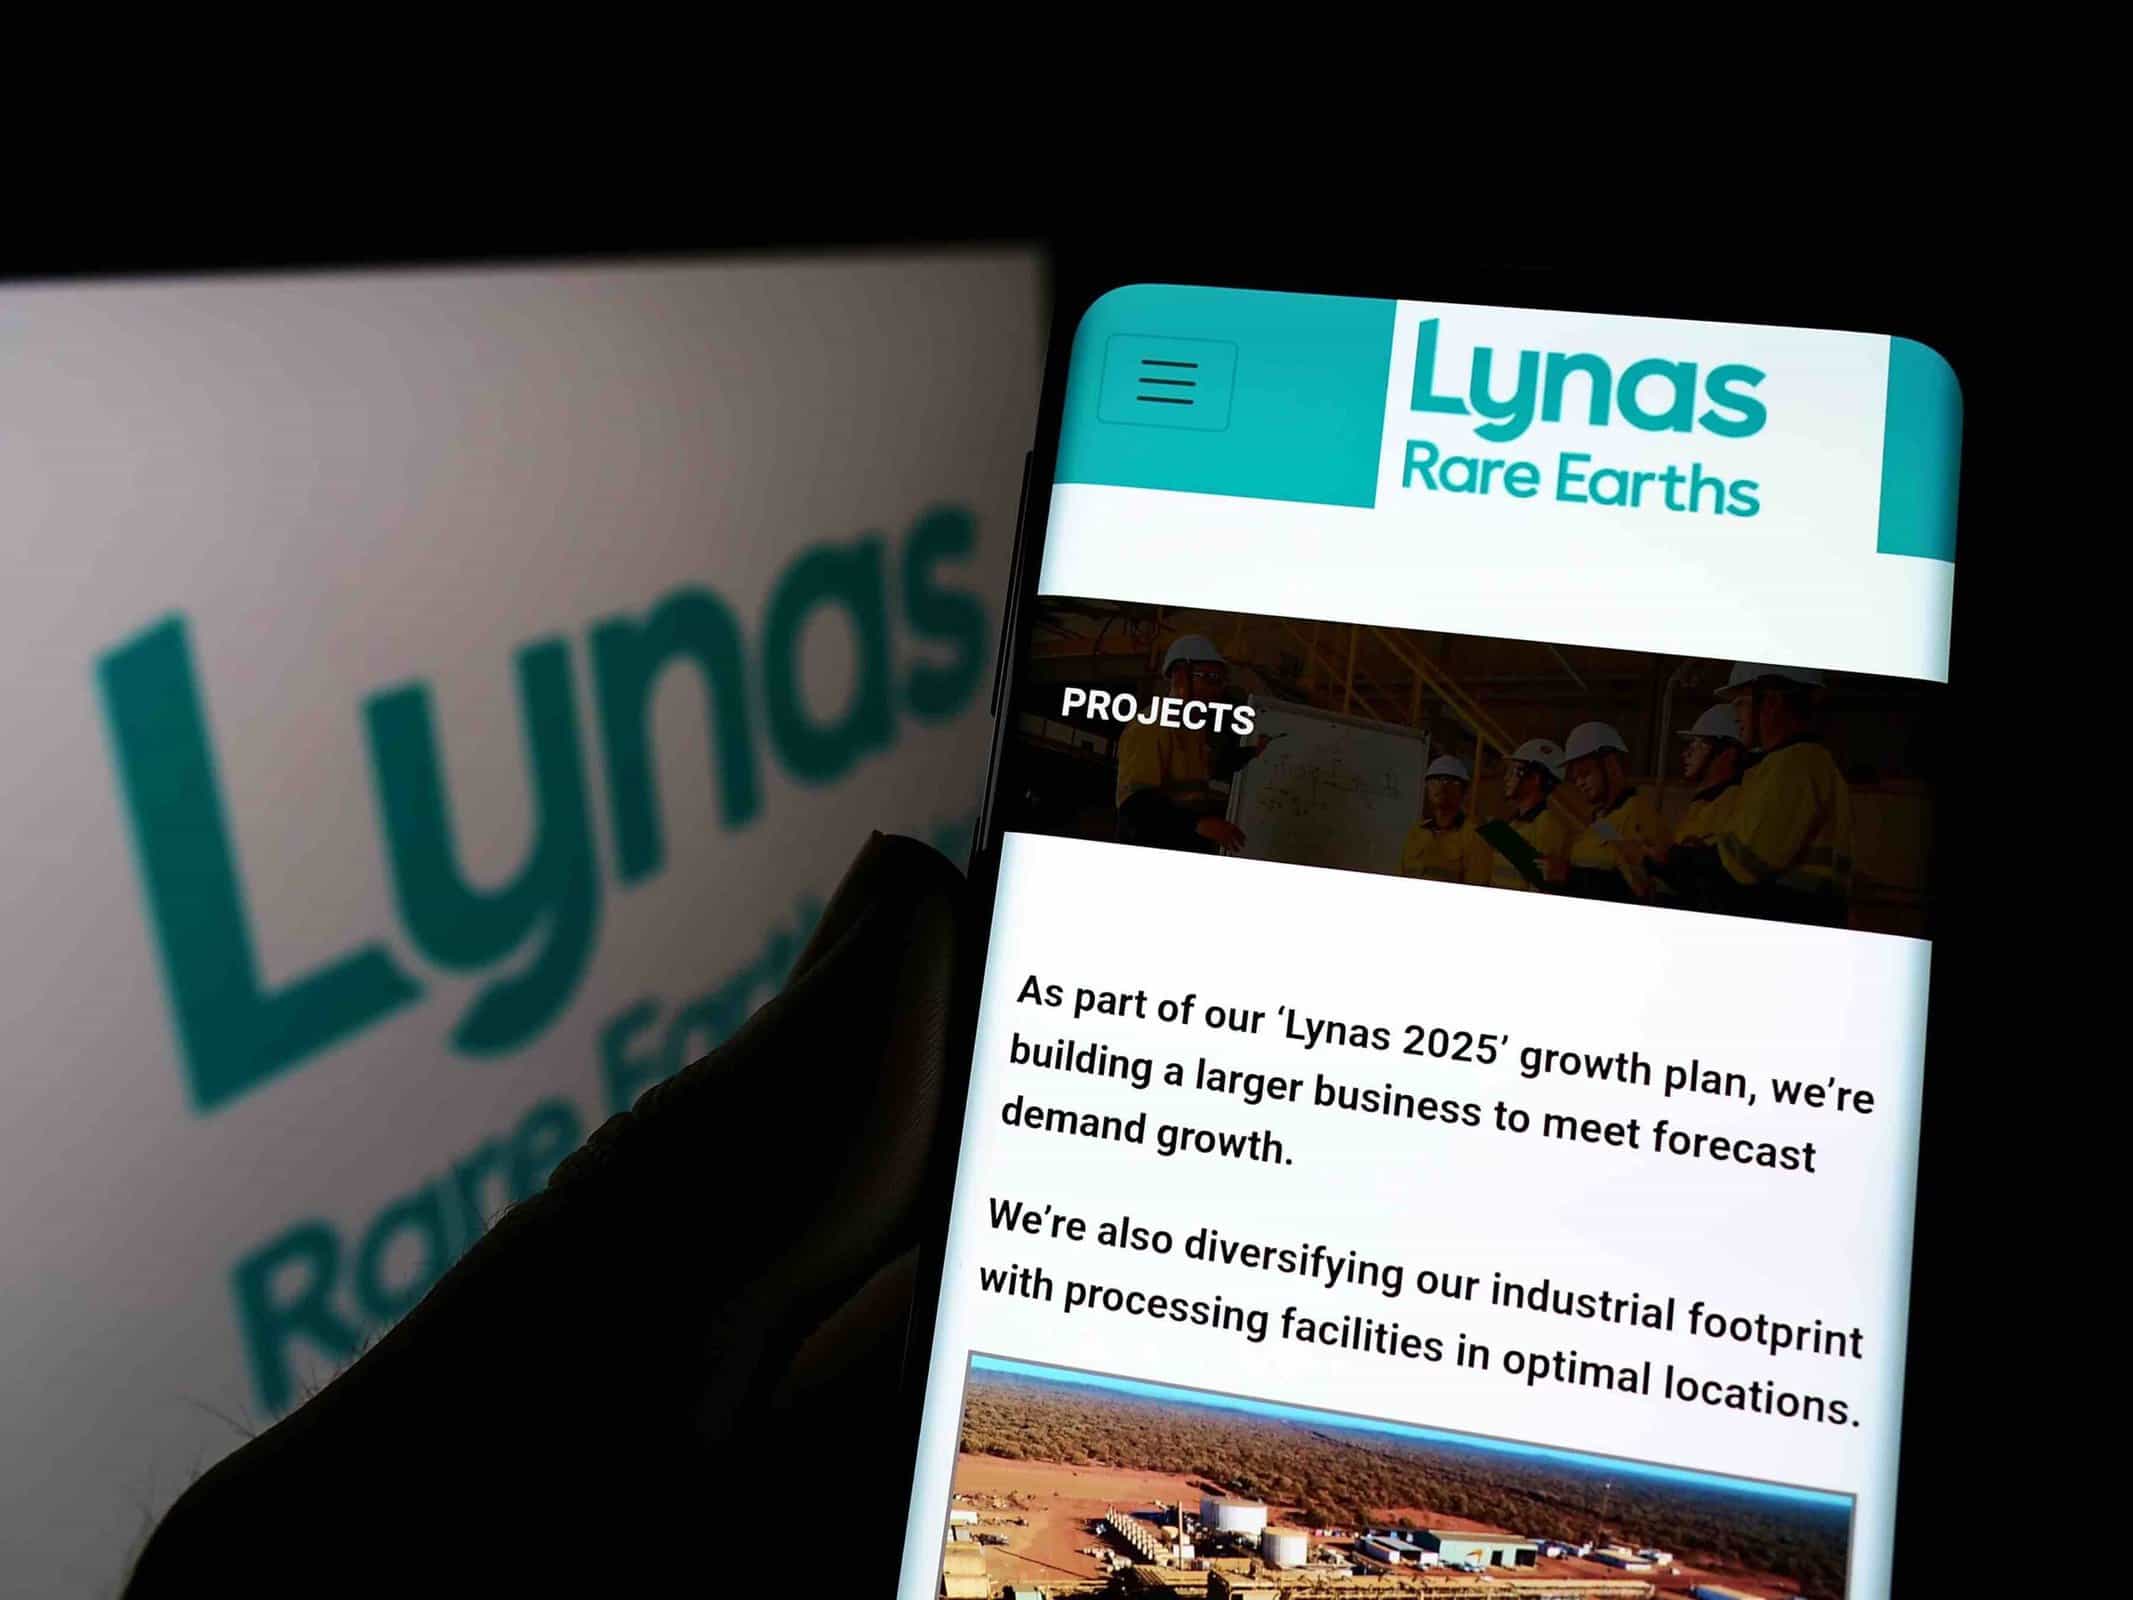 “The Kalgoorlie rare earths processing facility is Australia’s first value-added rare earths processing facility, making it a significant project for both Lynas and the Australian critical minerals industry."